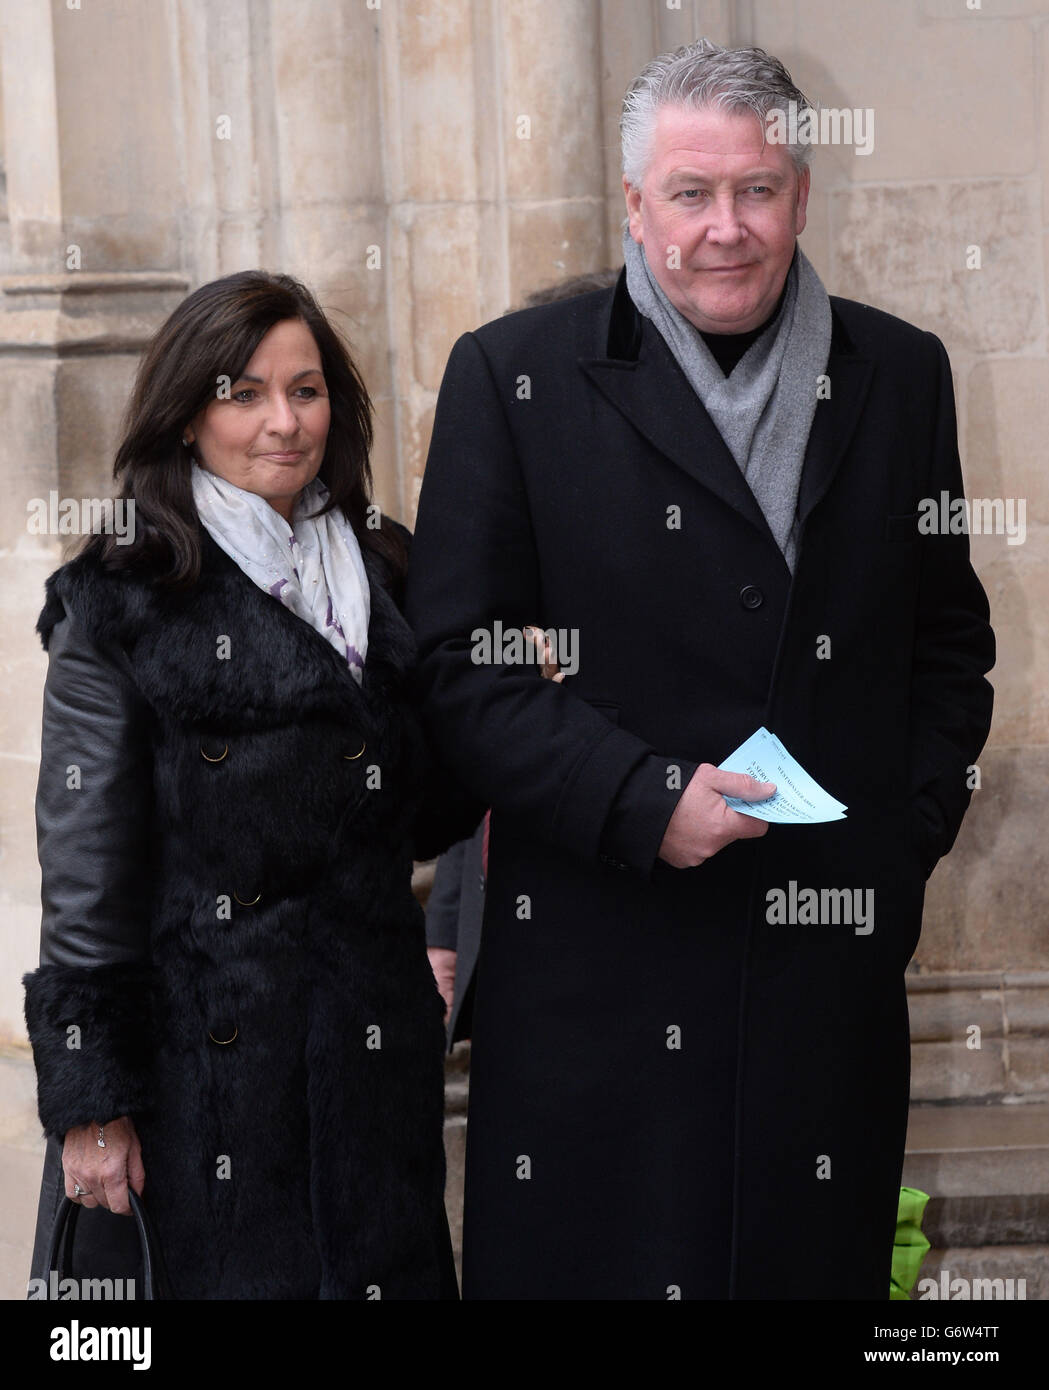 Tommy Walsh arrives with his wife Marie, at Westminster Abbey in London for a memorial service for the former South Africa president Nelson Mandela. Stock Photo